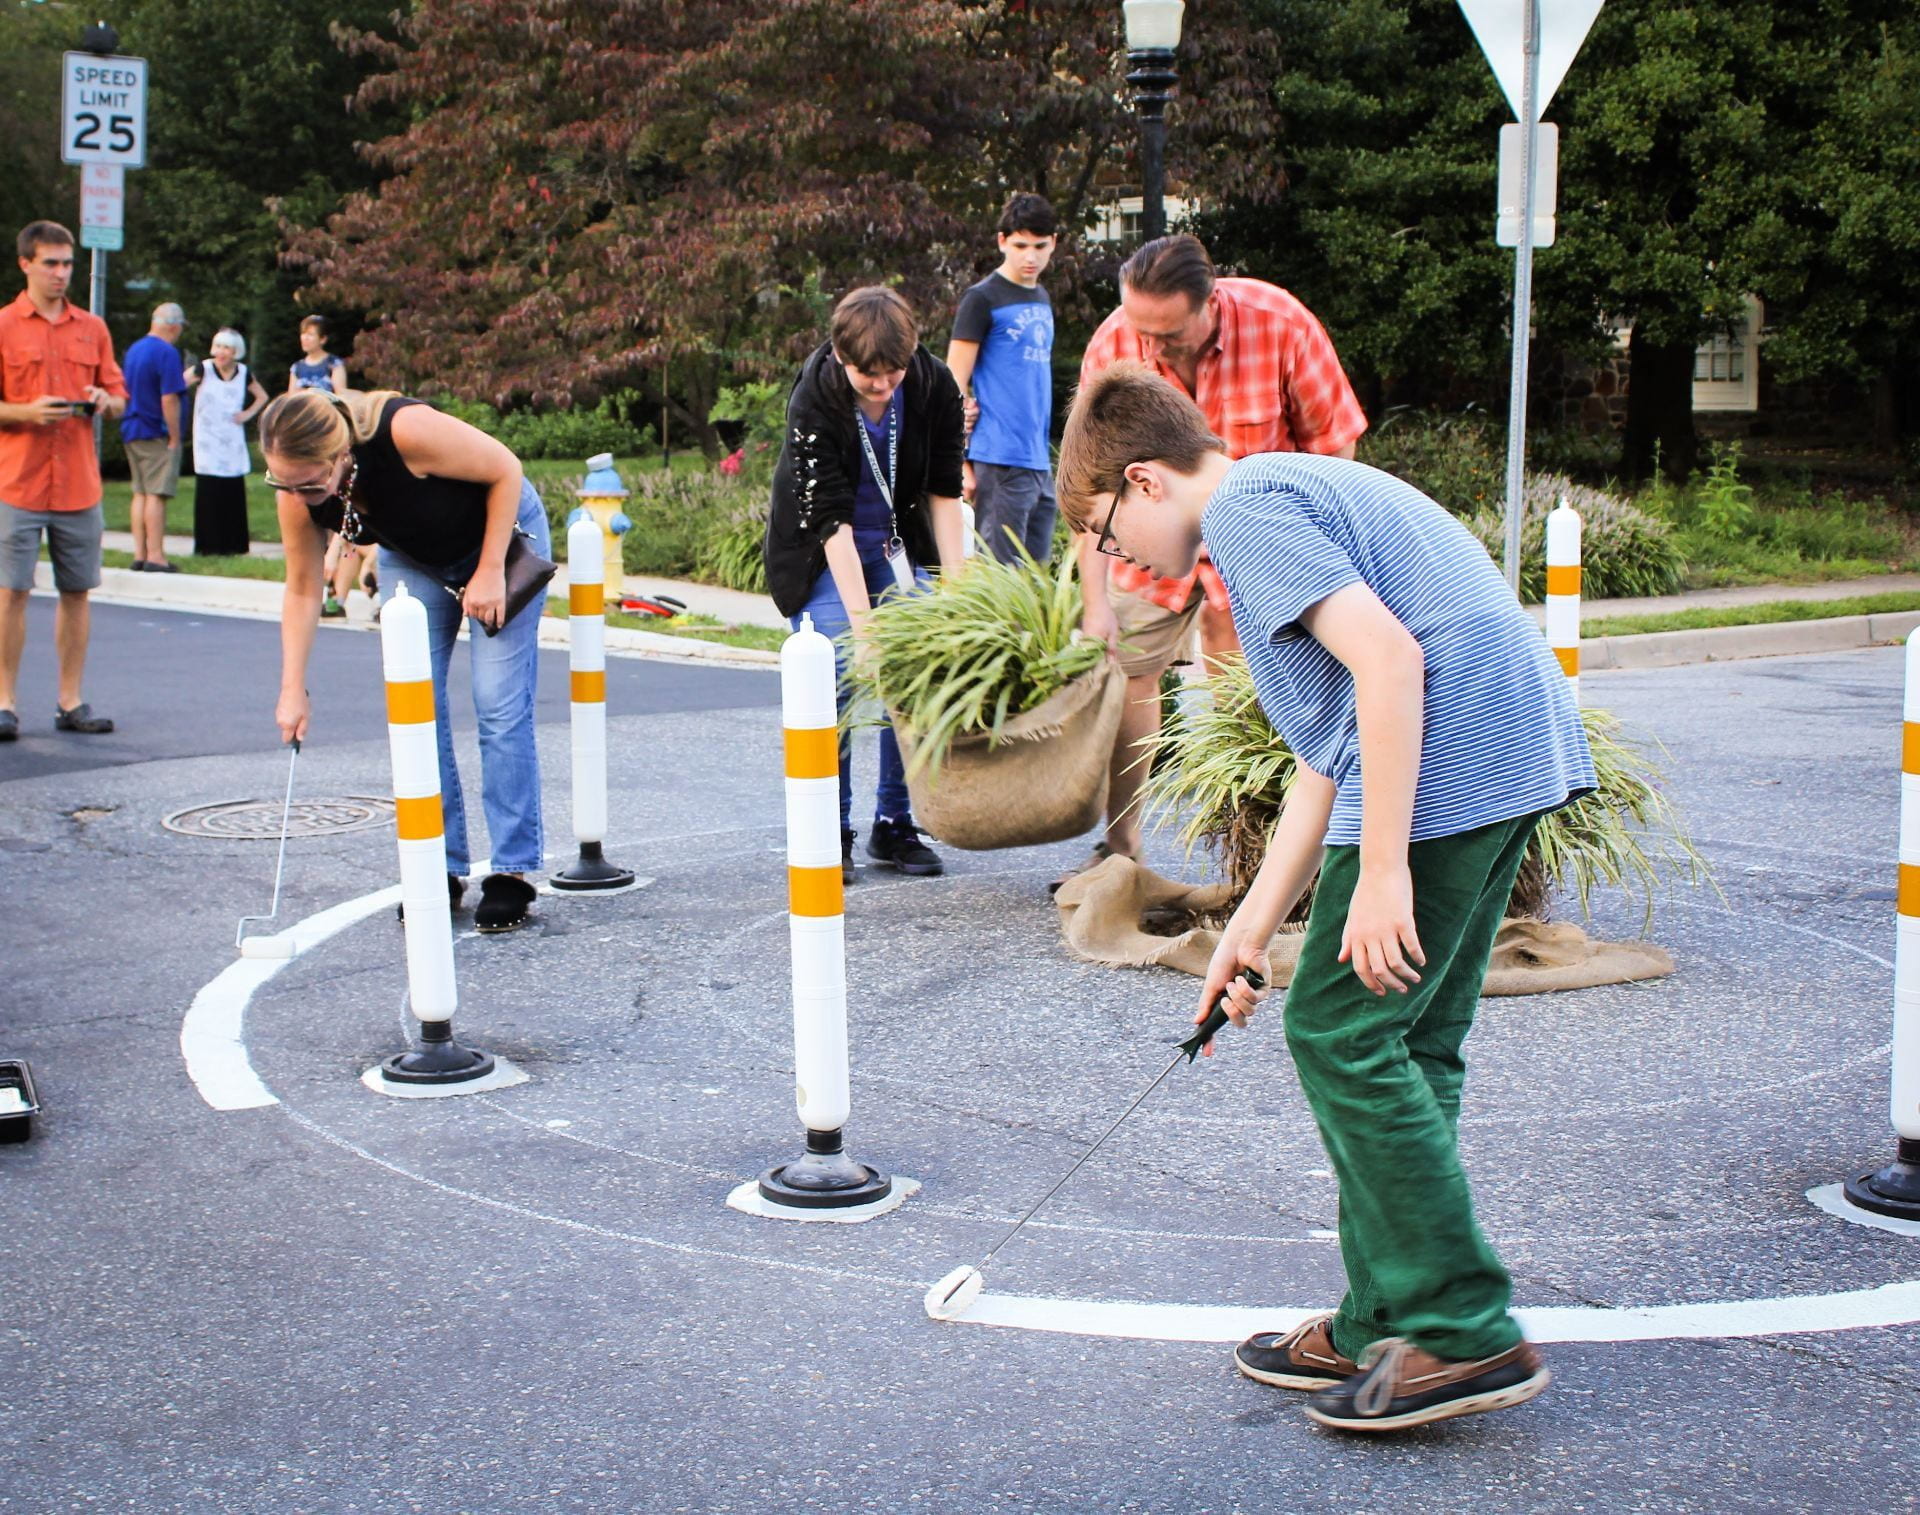 Newark residents paint temporary roundabout on road for pop-up demonstration.